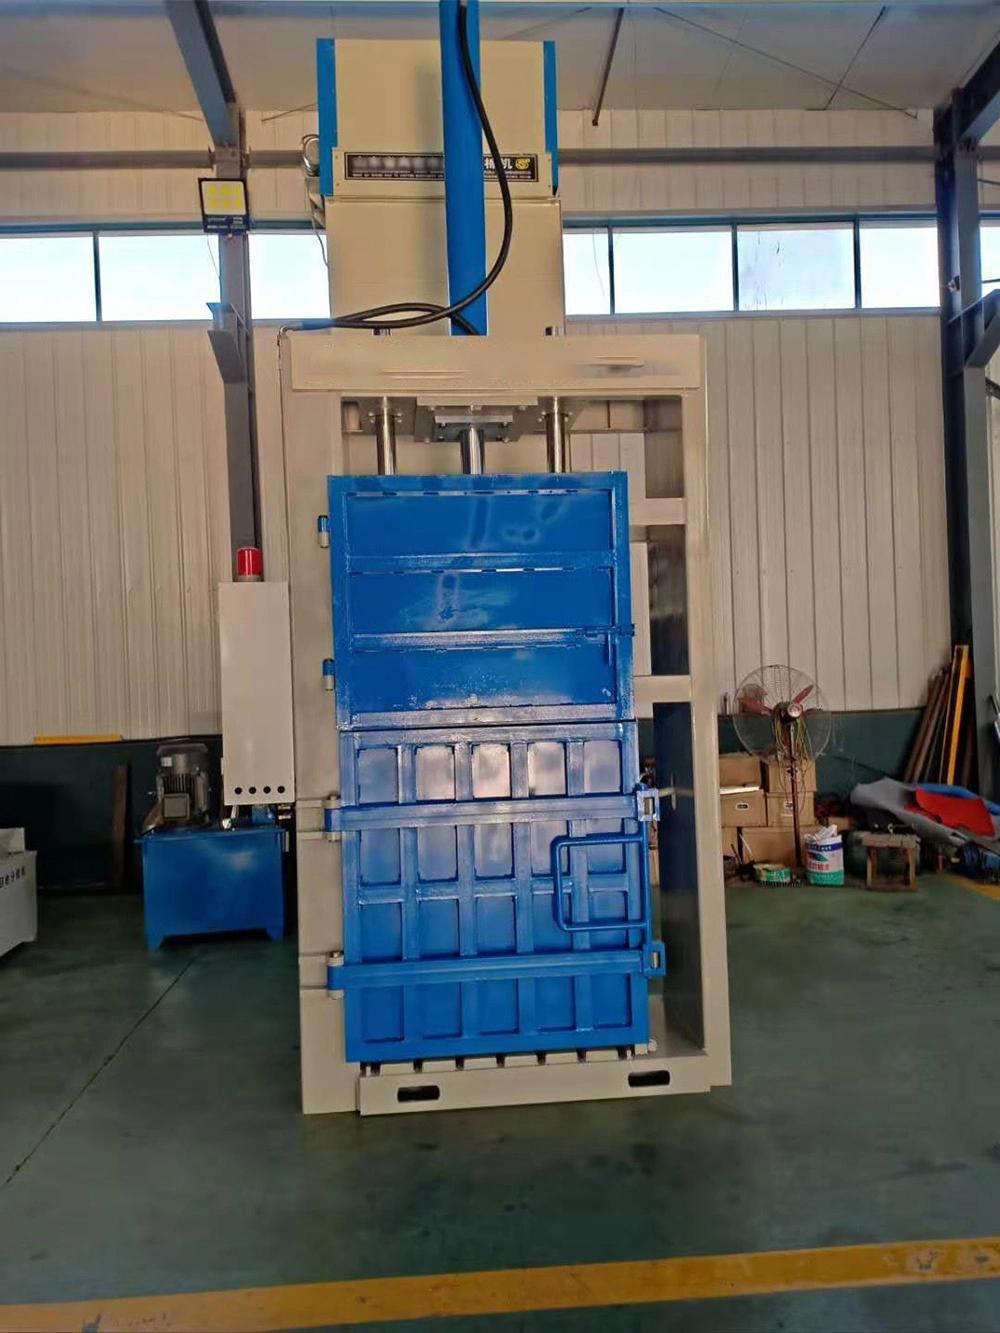 Waste Paper Automatic Packing Machine/Packing Machine Conveying System, Automatic Packing Machine for Waste Paper Boxes, Corrugated Boxes, Plastic Films, etc.